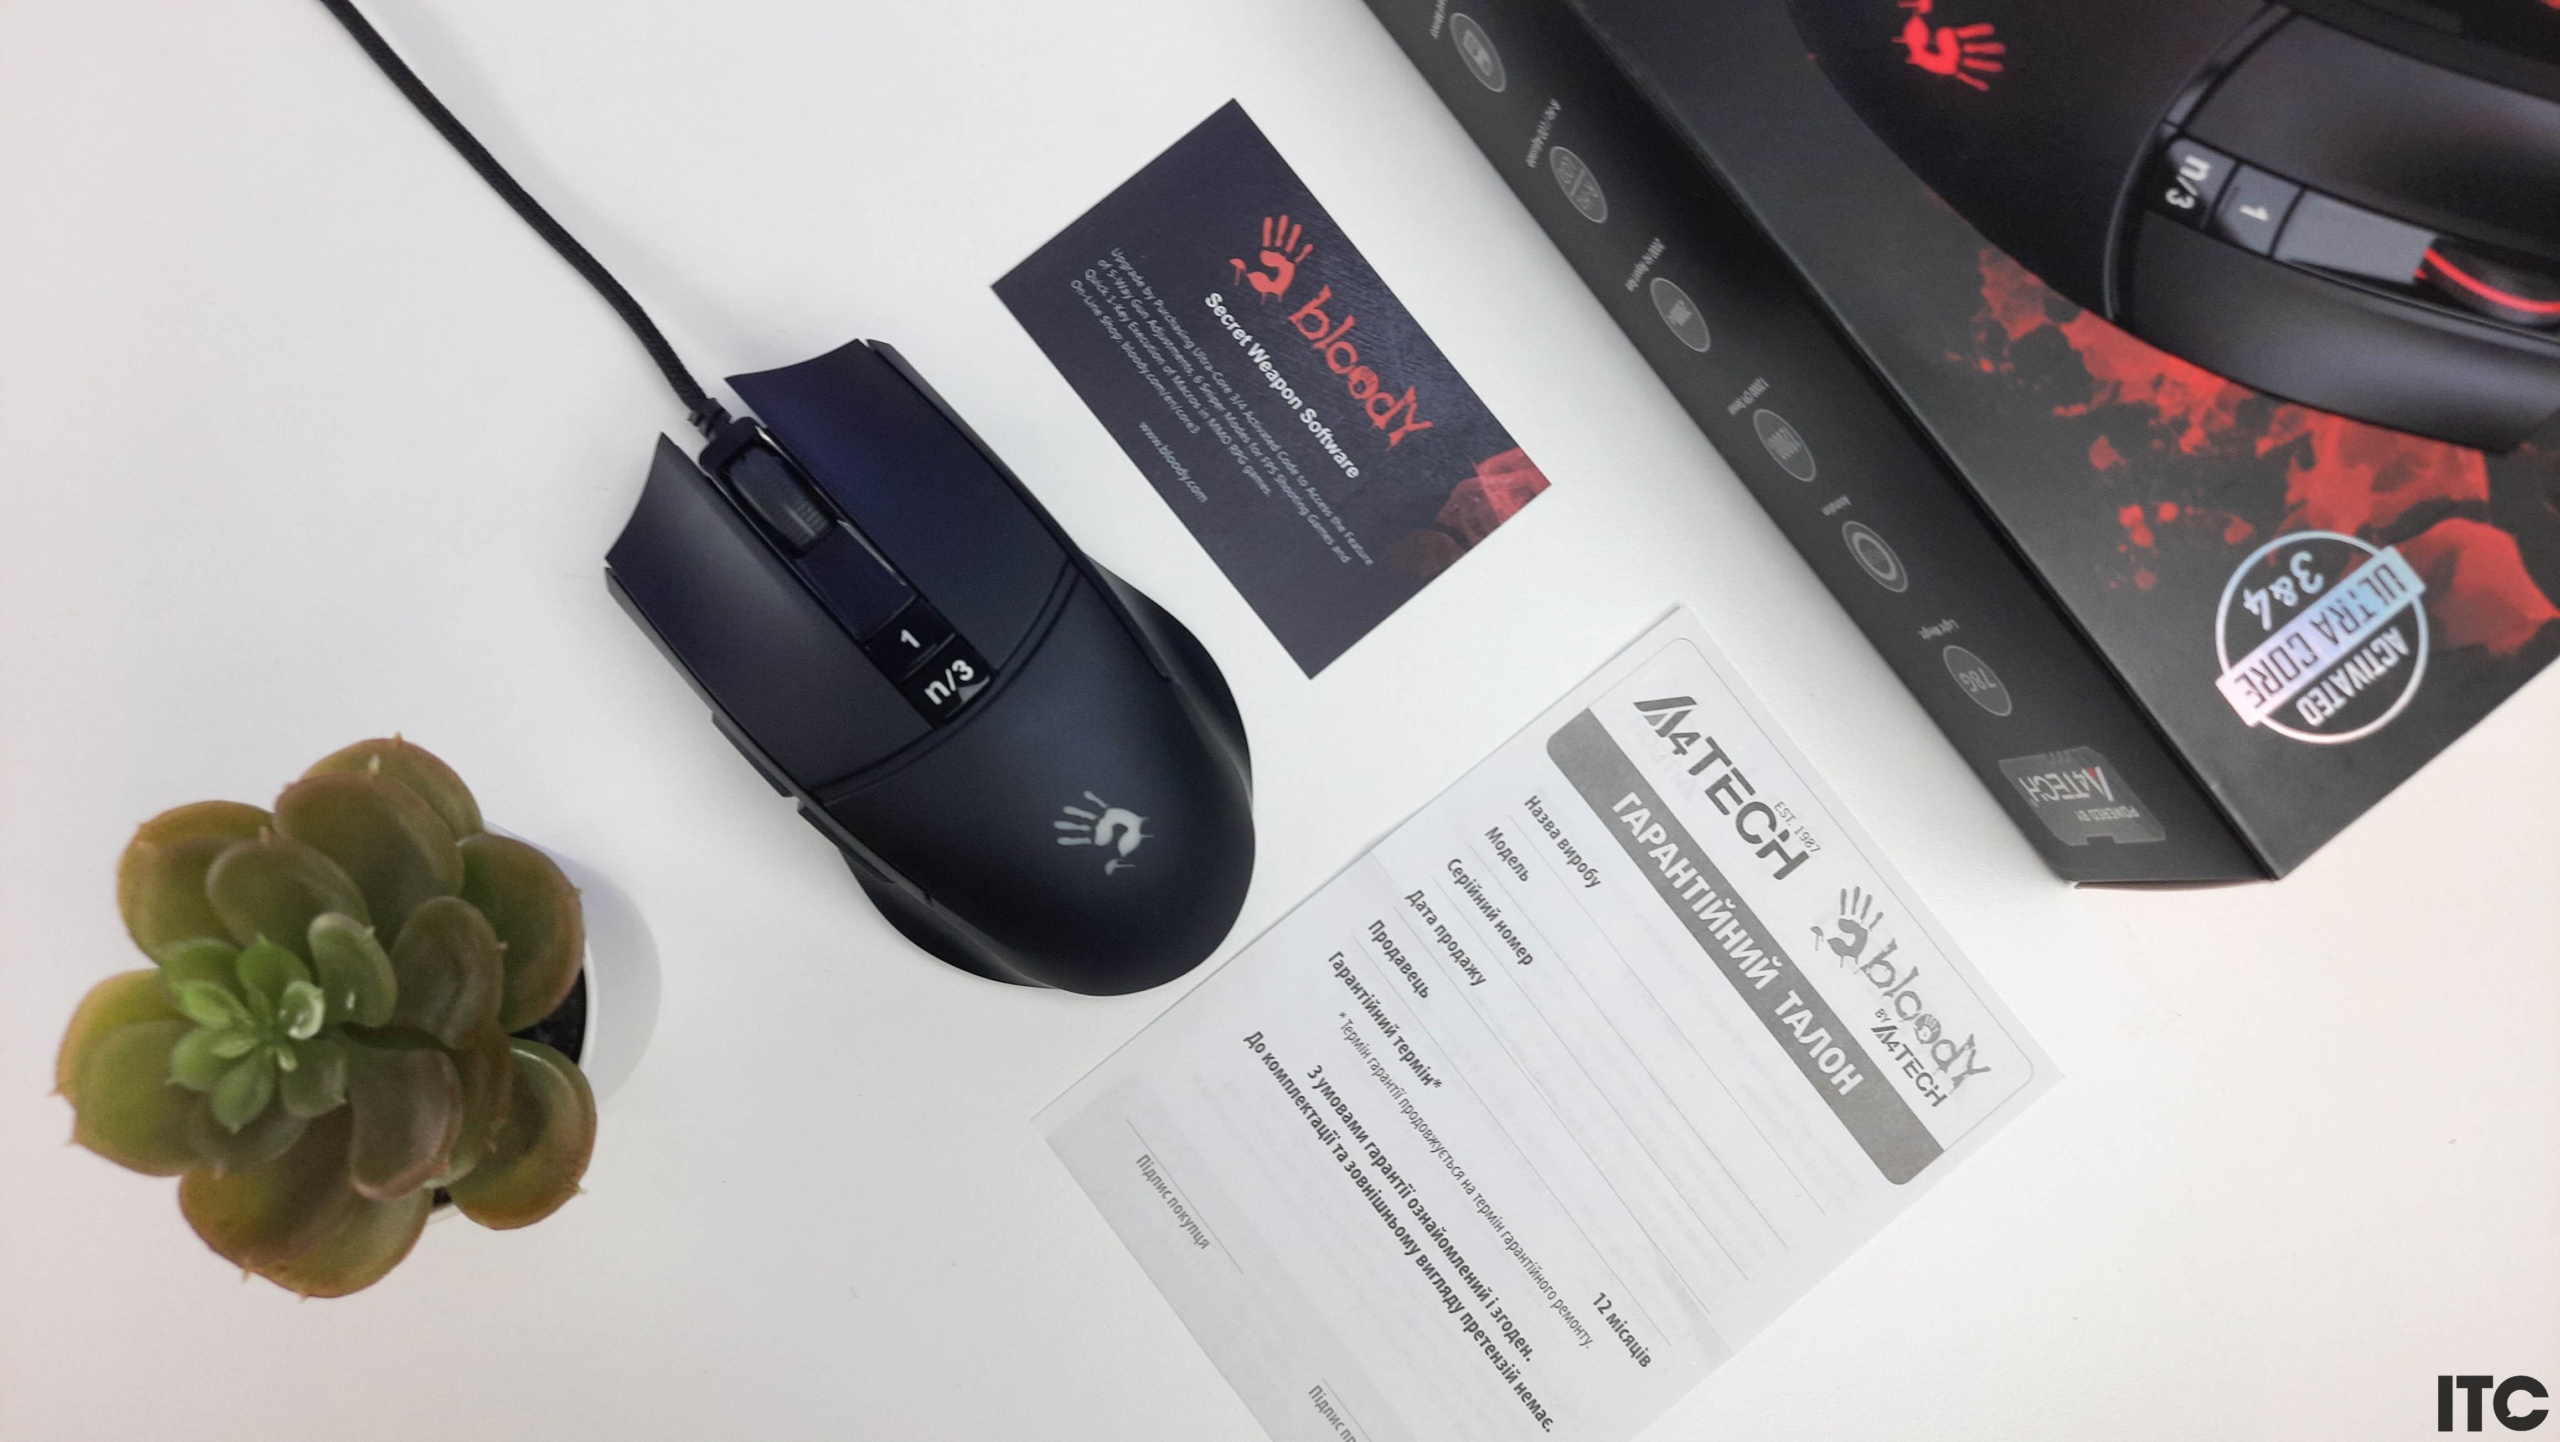 Blacklisted device bloody mouse a4tech rust решение фото 116